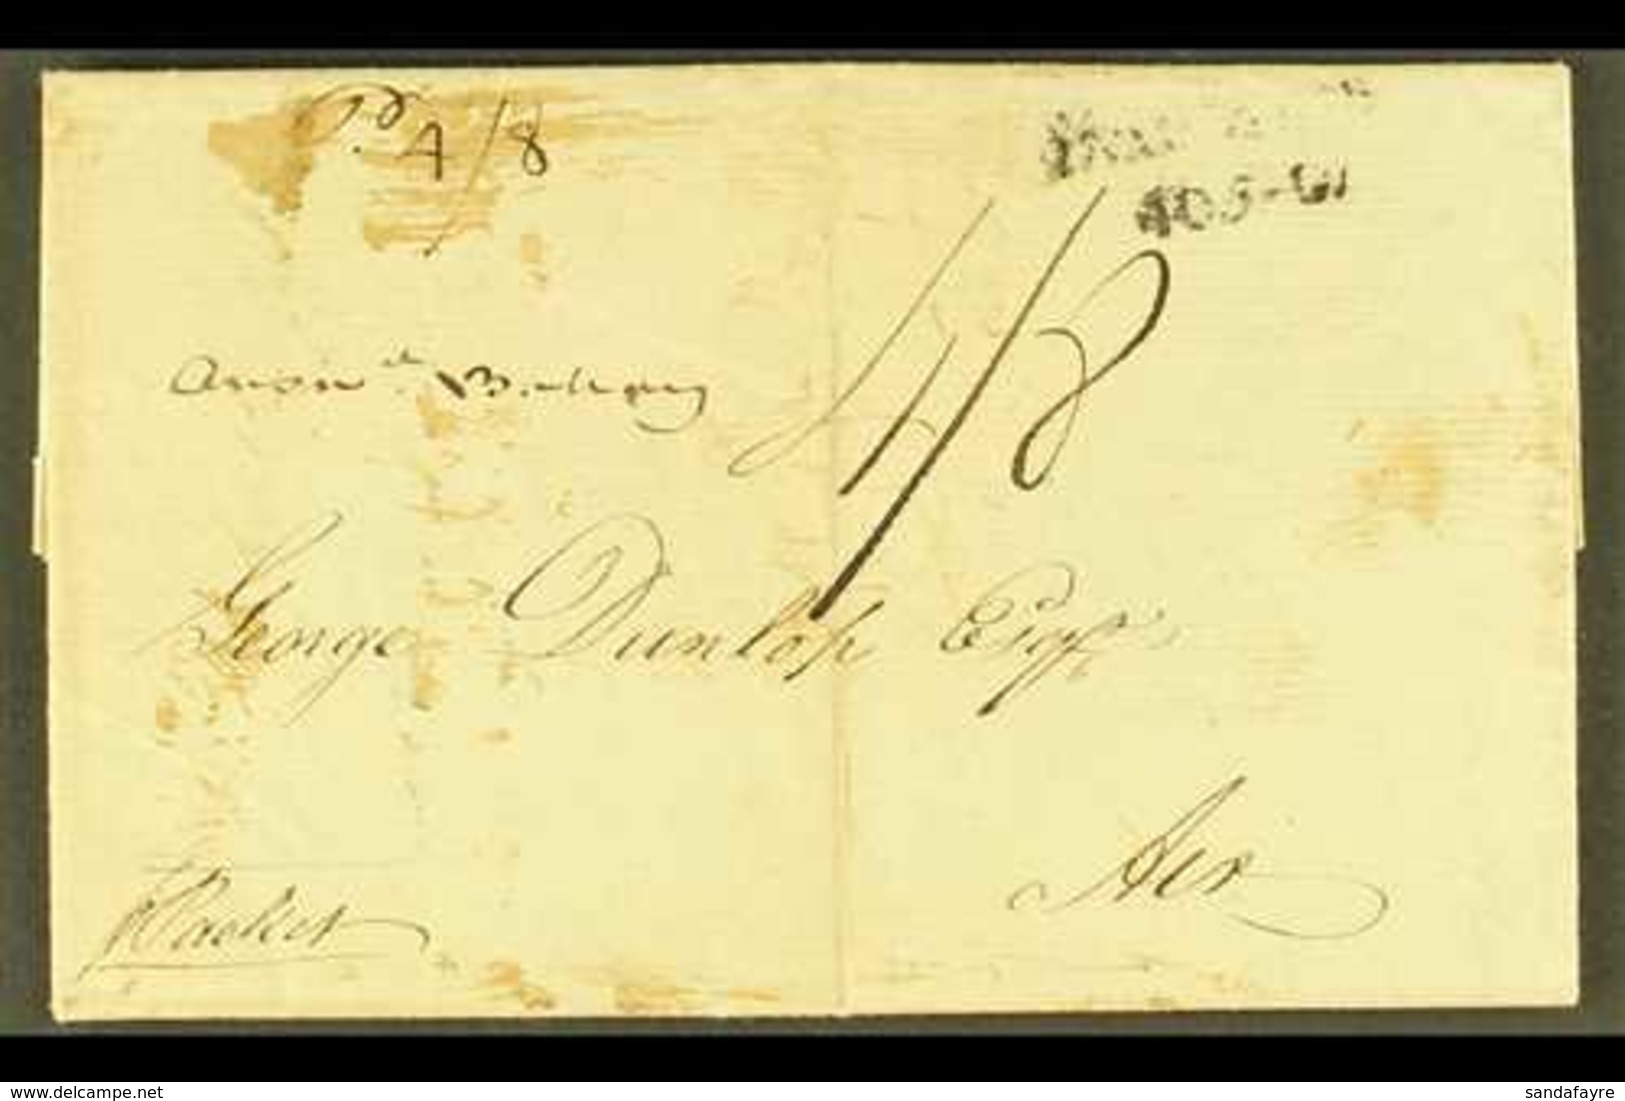 1812 ENTIRE TO SCOTLAND  1812 (4 FEB) Entire Letter Addressed To George Dunlop At Ayr, With Manuscript "4/8" Rate And En - Grenada (...-1974)